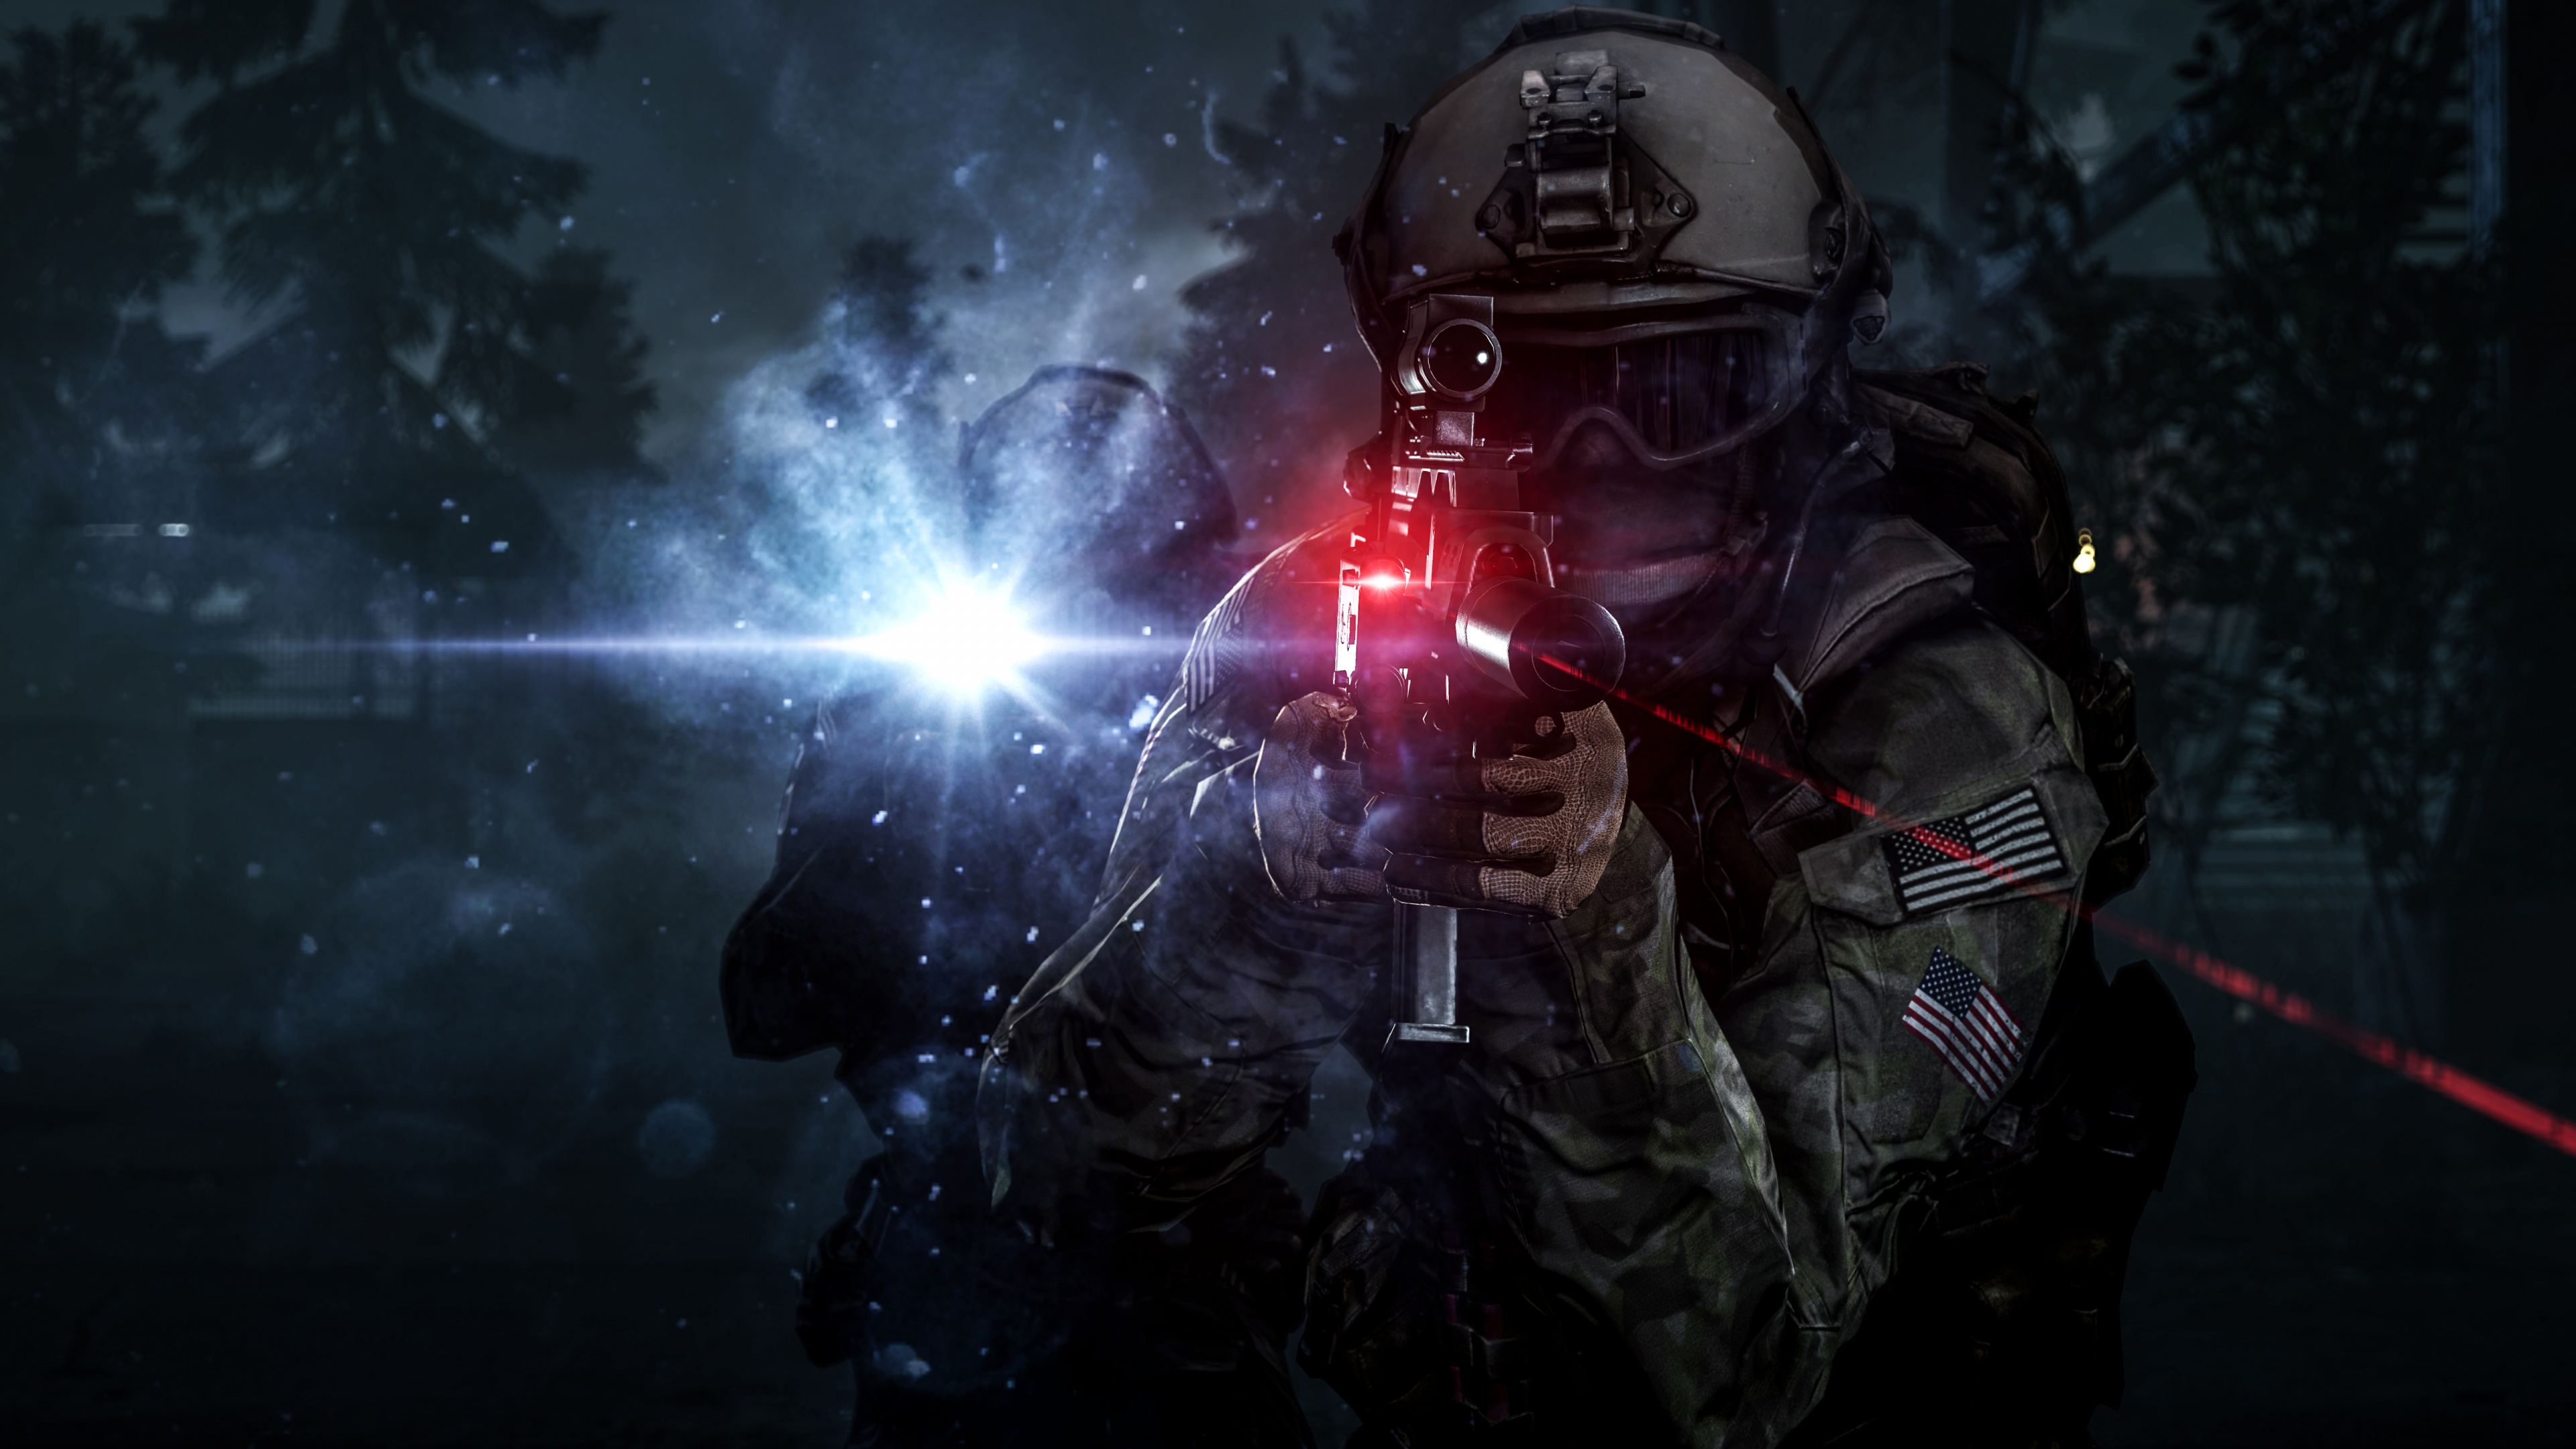 pc Game, Darkness, Space, Android, Battlefield 4. Wallpaper in 3840x2160 Resolution